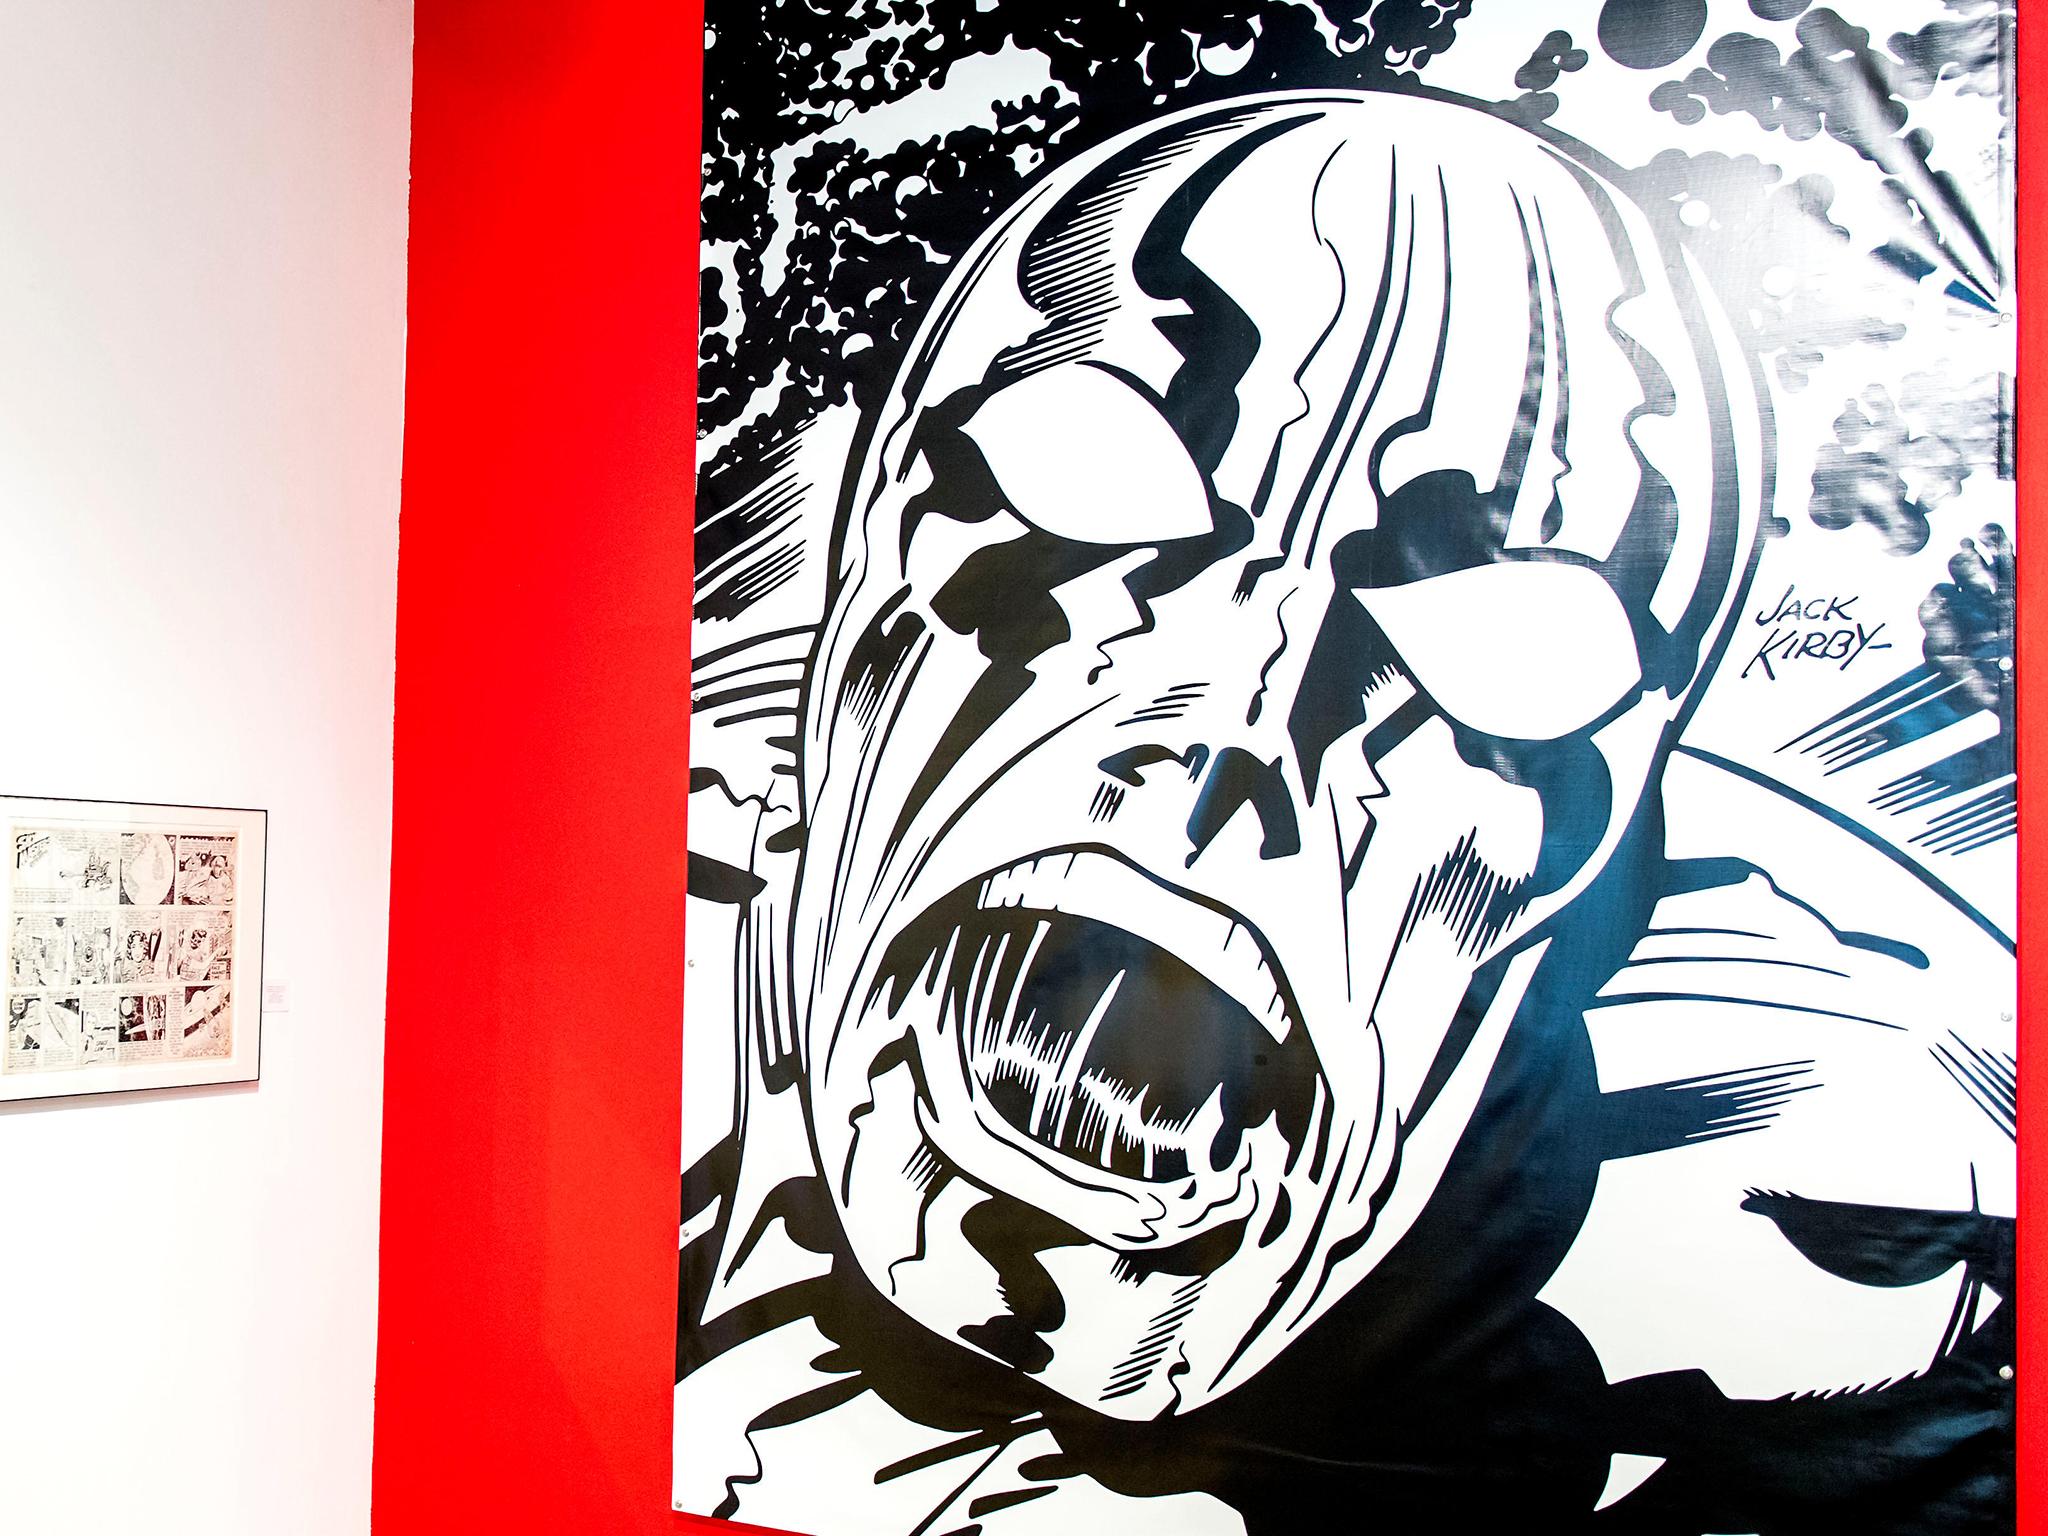 The Silver Surfer artist is celebrated at the CSUN Art Galleries with the exhibition, Comic Book Apocalypse: The Graphic World of Jack Kirby